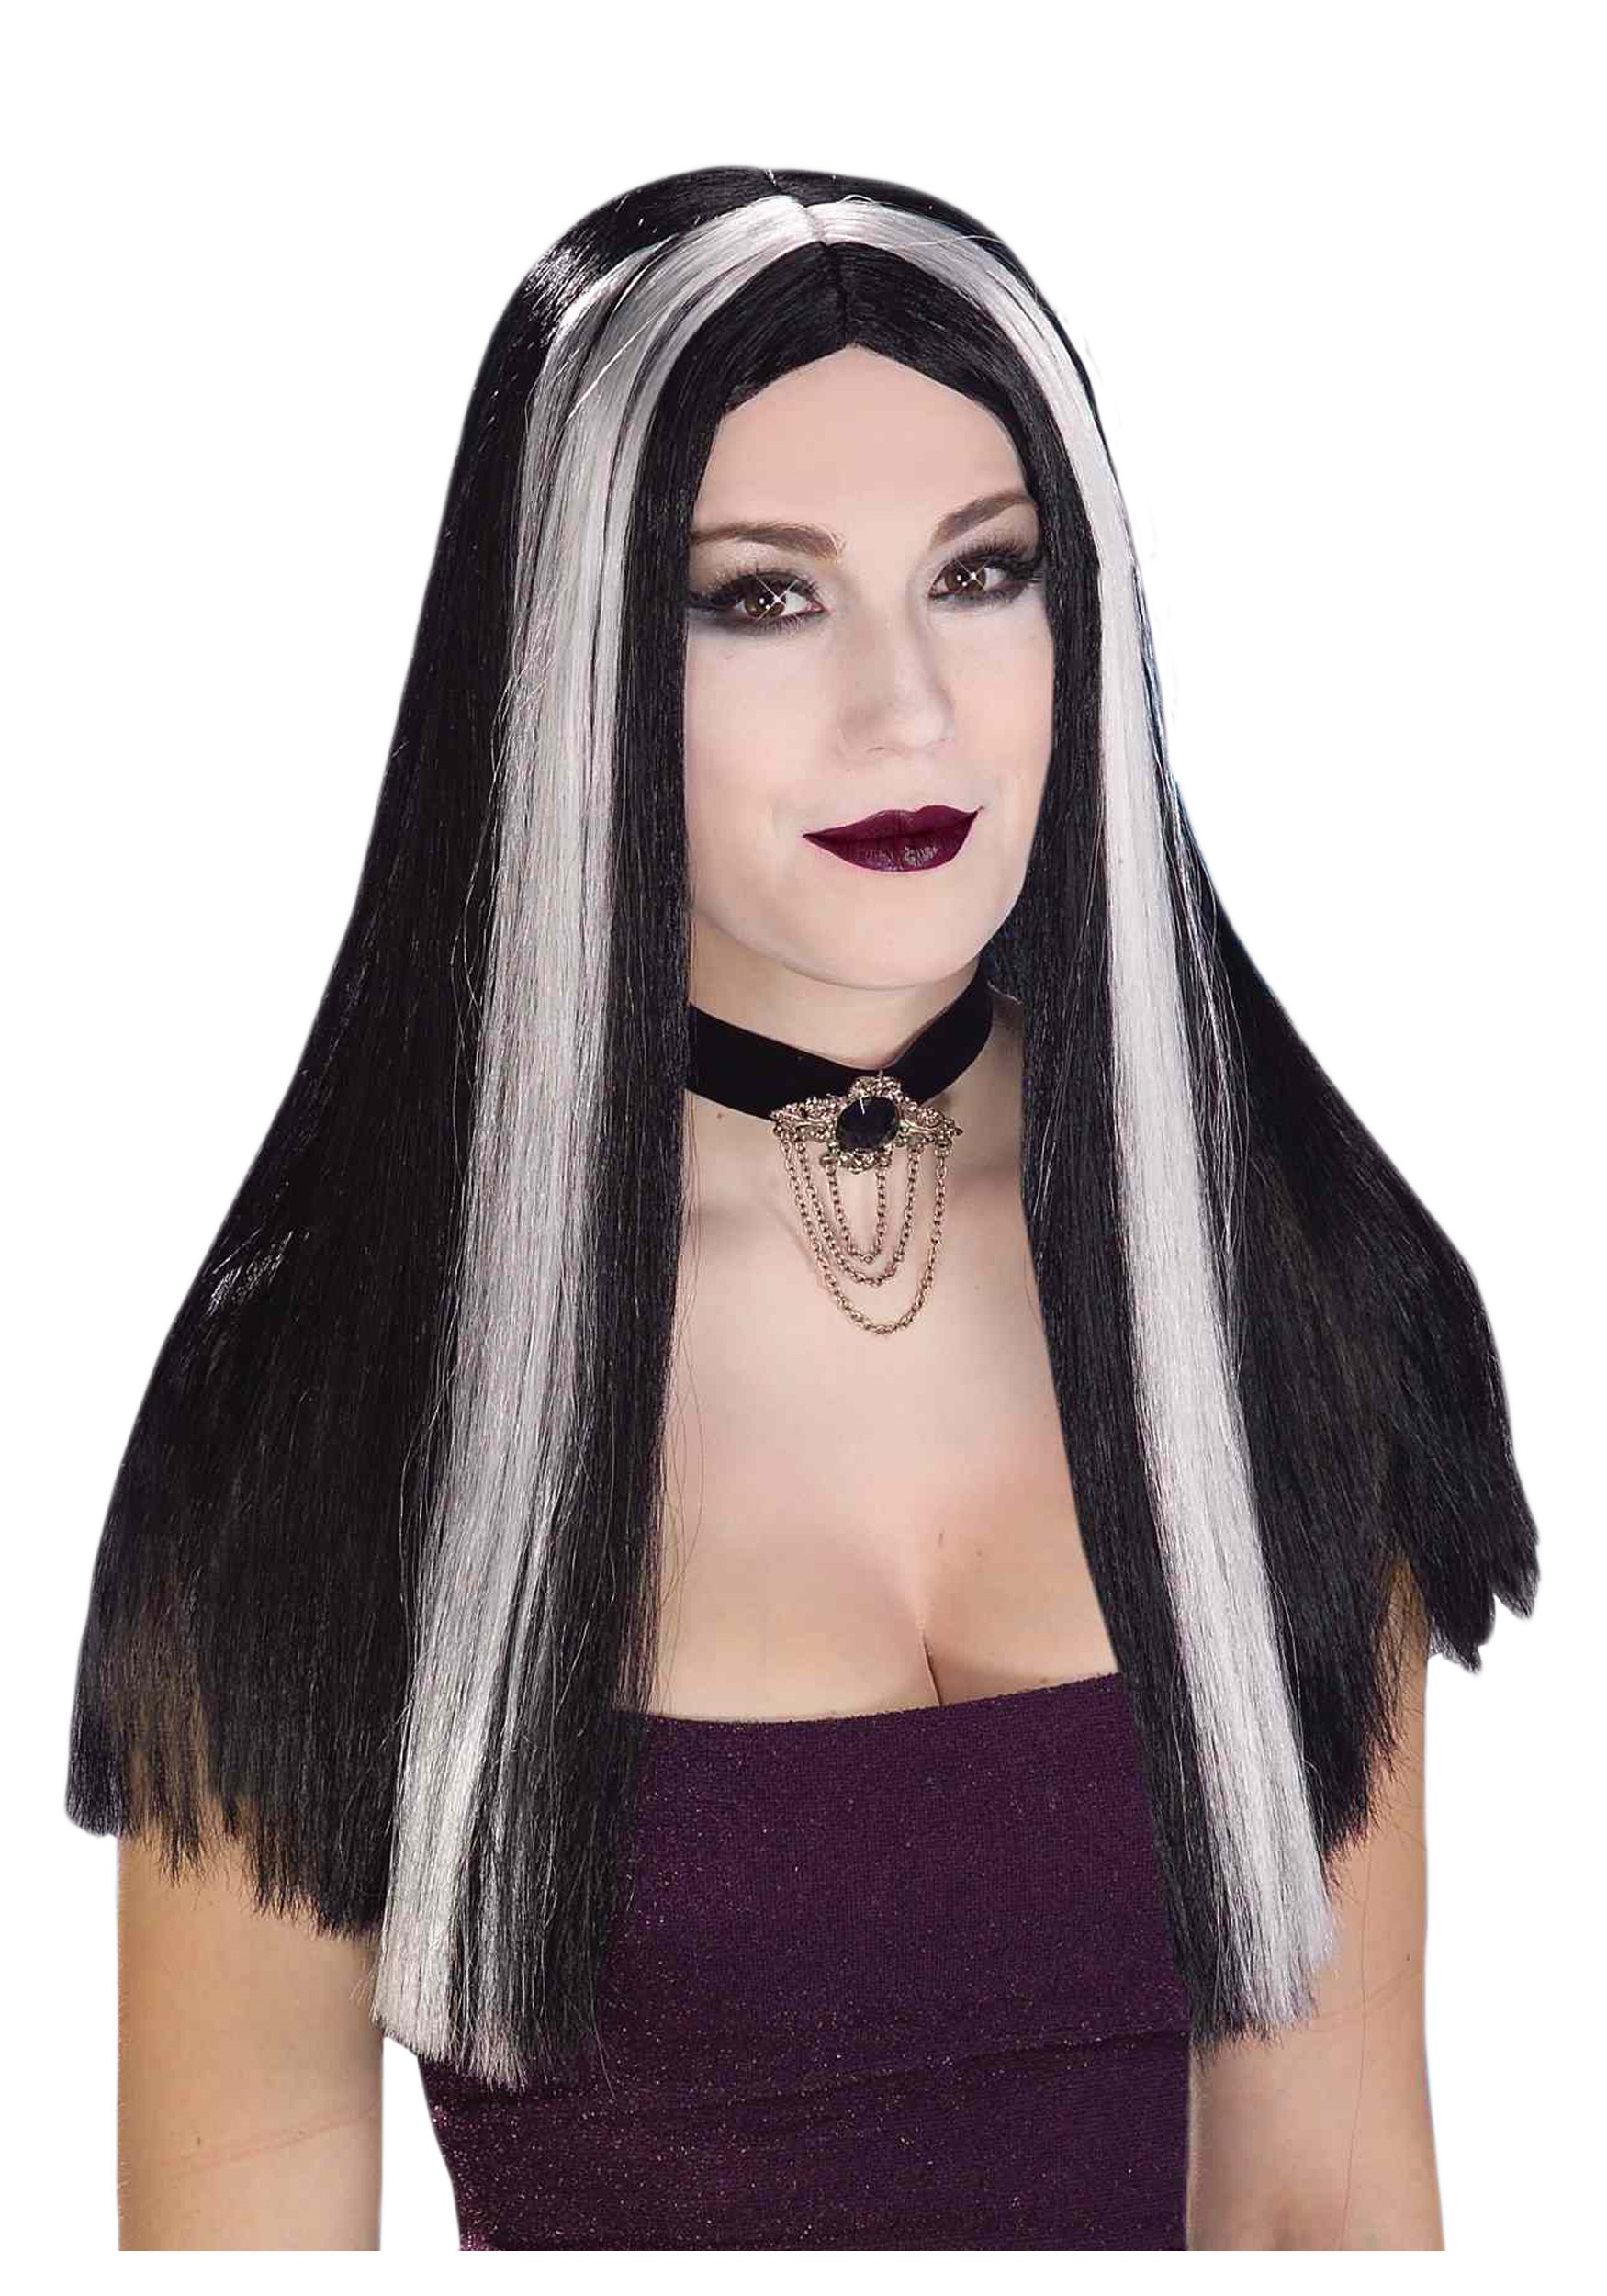 Halloween Costumes With Black And White Hair